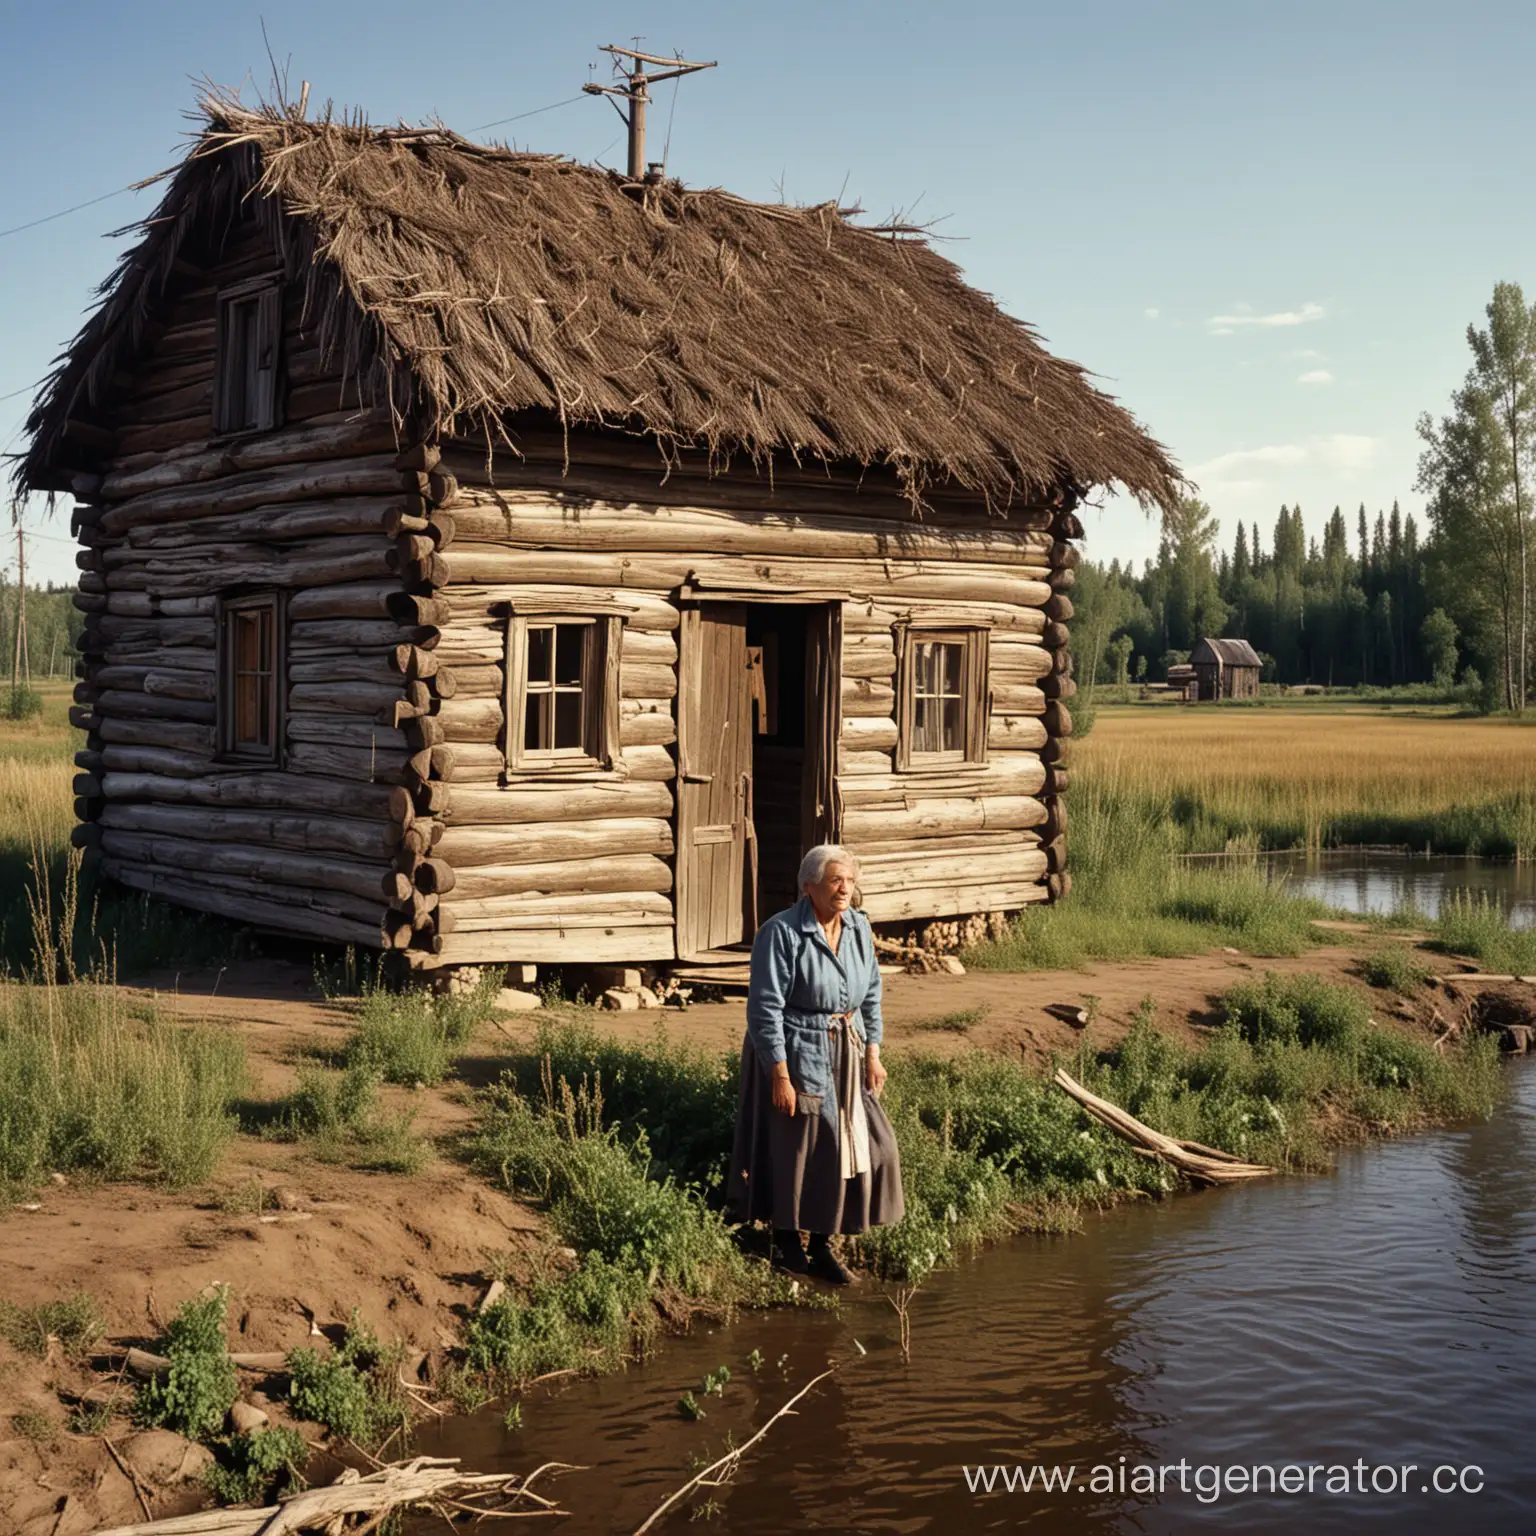 Lonely-Siberian-Grandma-in-Her-Rural-Home-by-the-Big-River-1970s